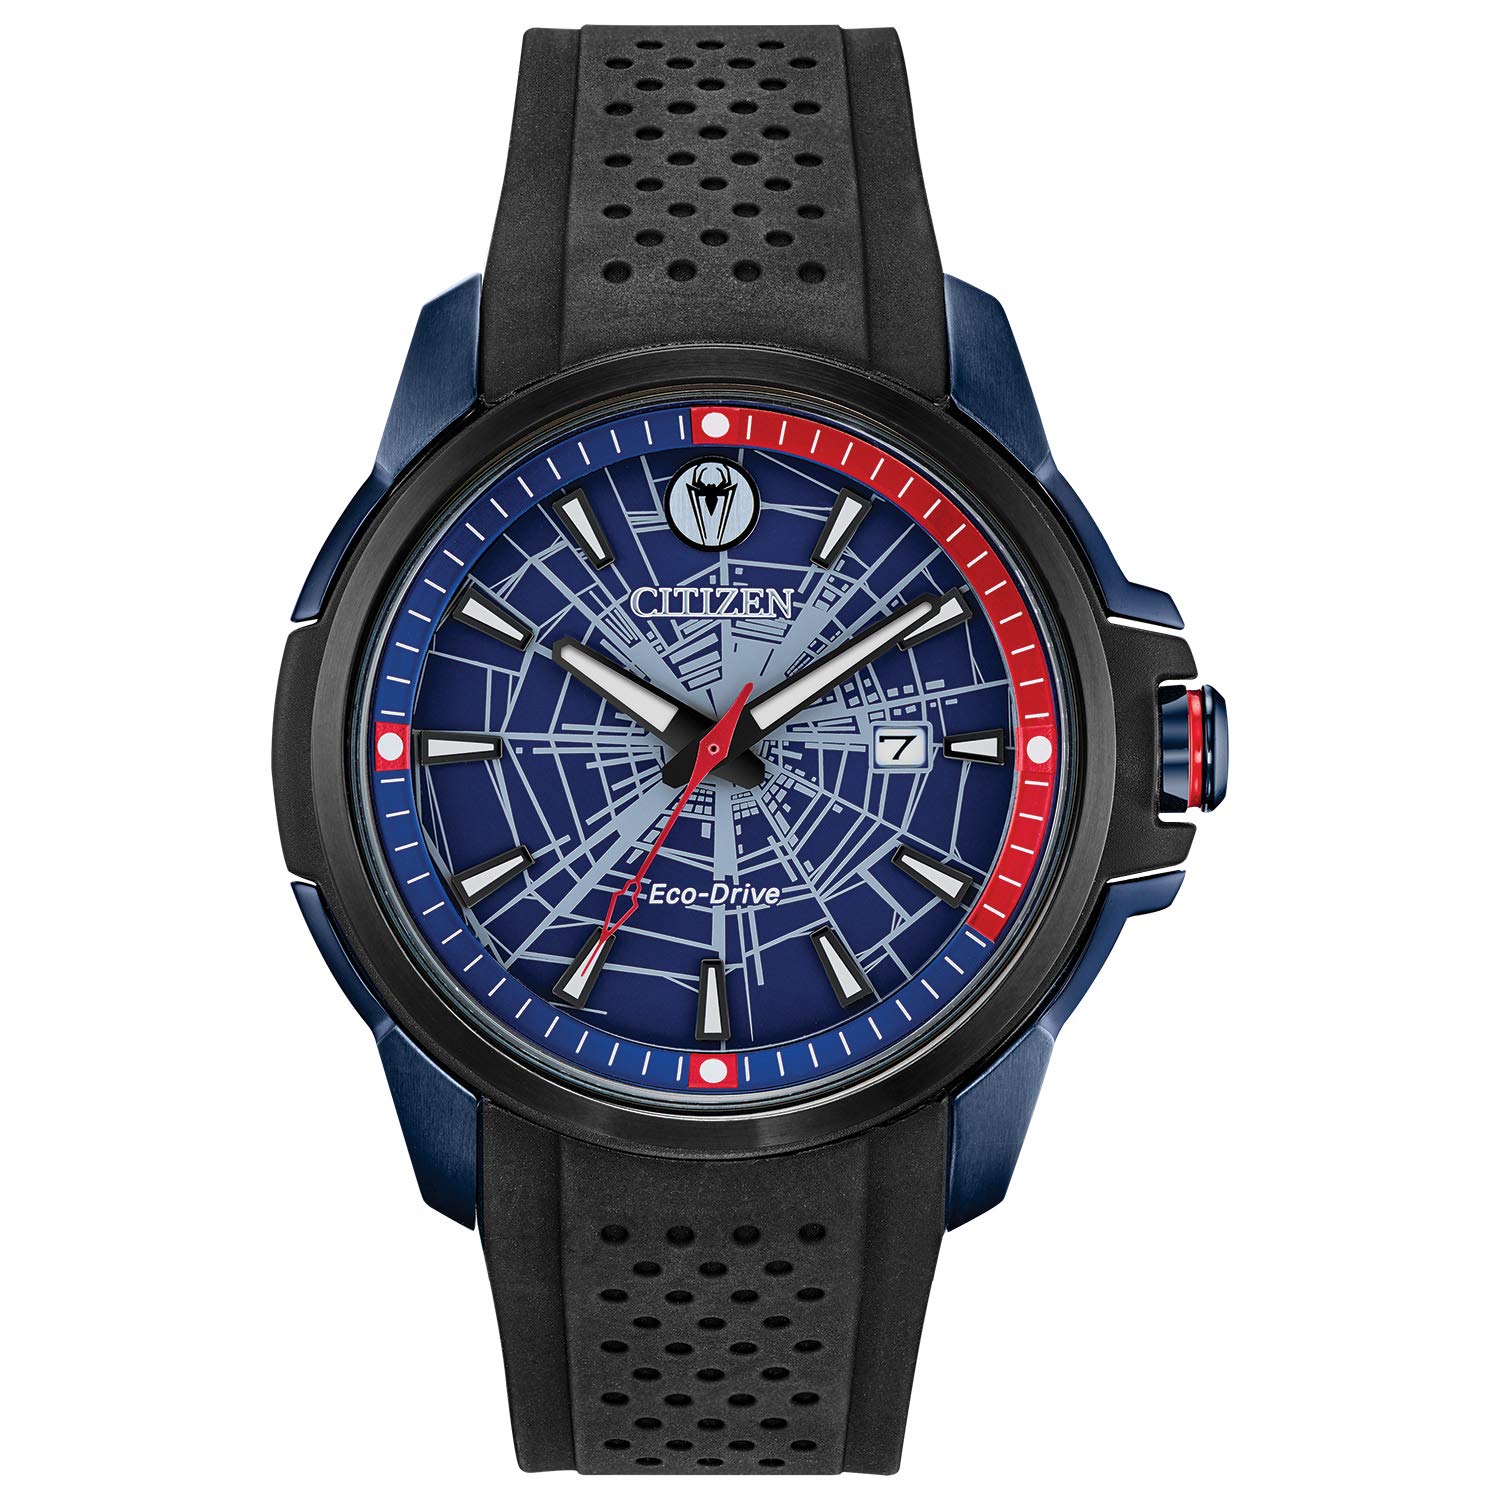 Citizen Eco-Drive Marvel Men's Watch, Stainless Steel with Polyurethane Strap, Spider-Man Black - $90.30 at Amazon